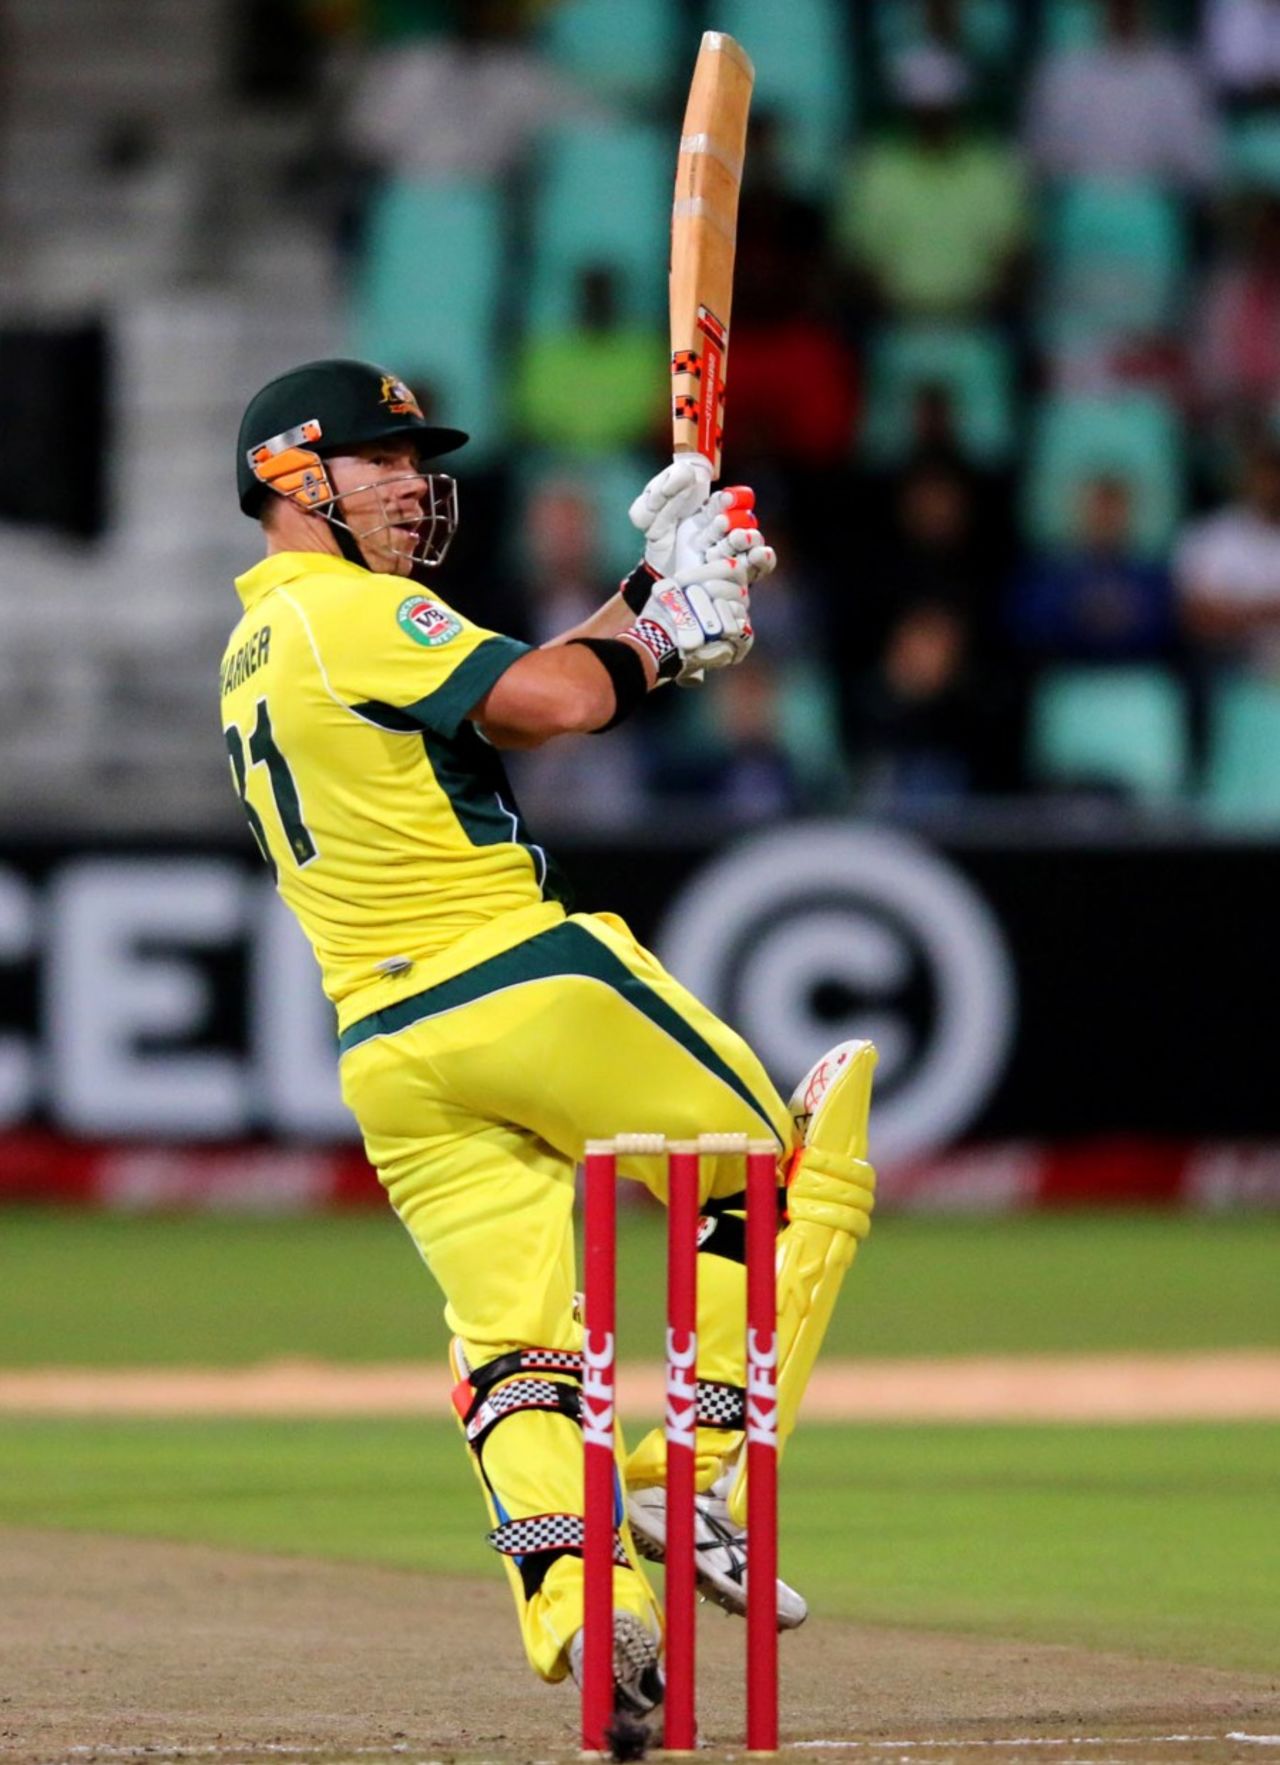 David Warner swivels one around behind square, South Africa v Australia, 2nd T20, Durban, March 12, 2014